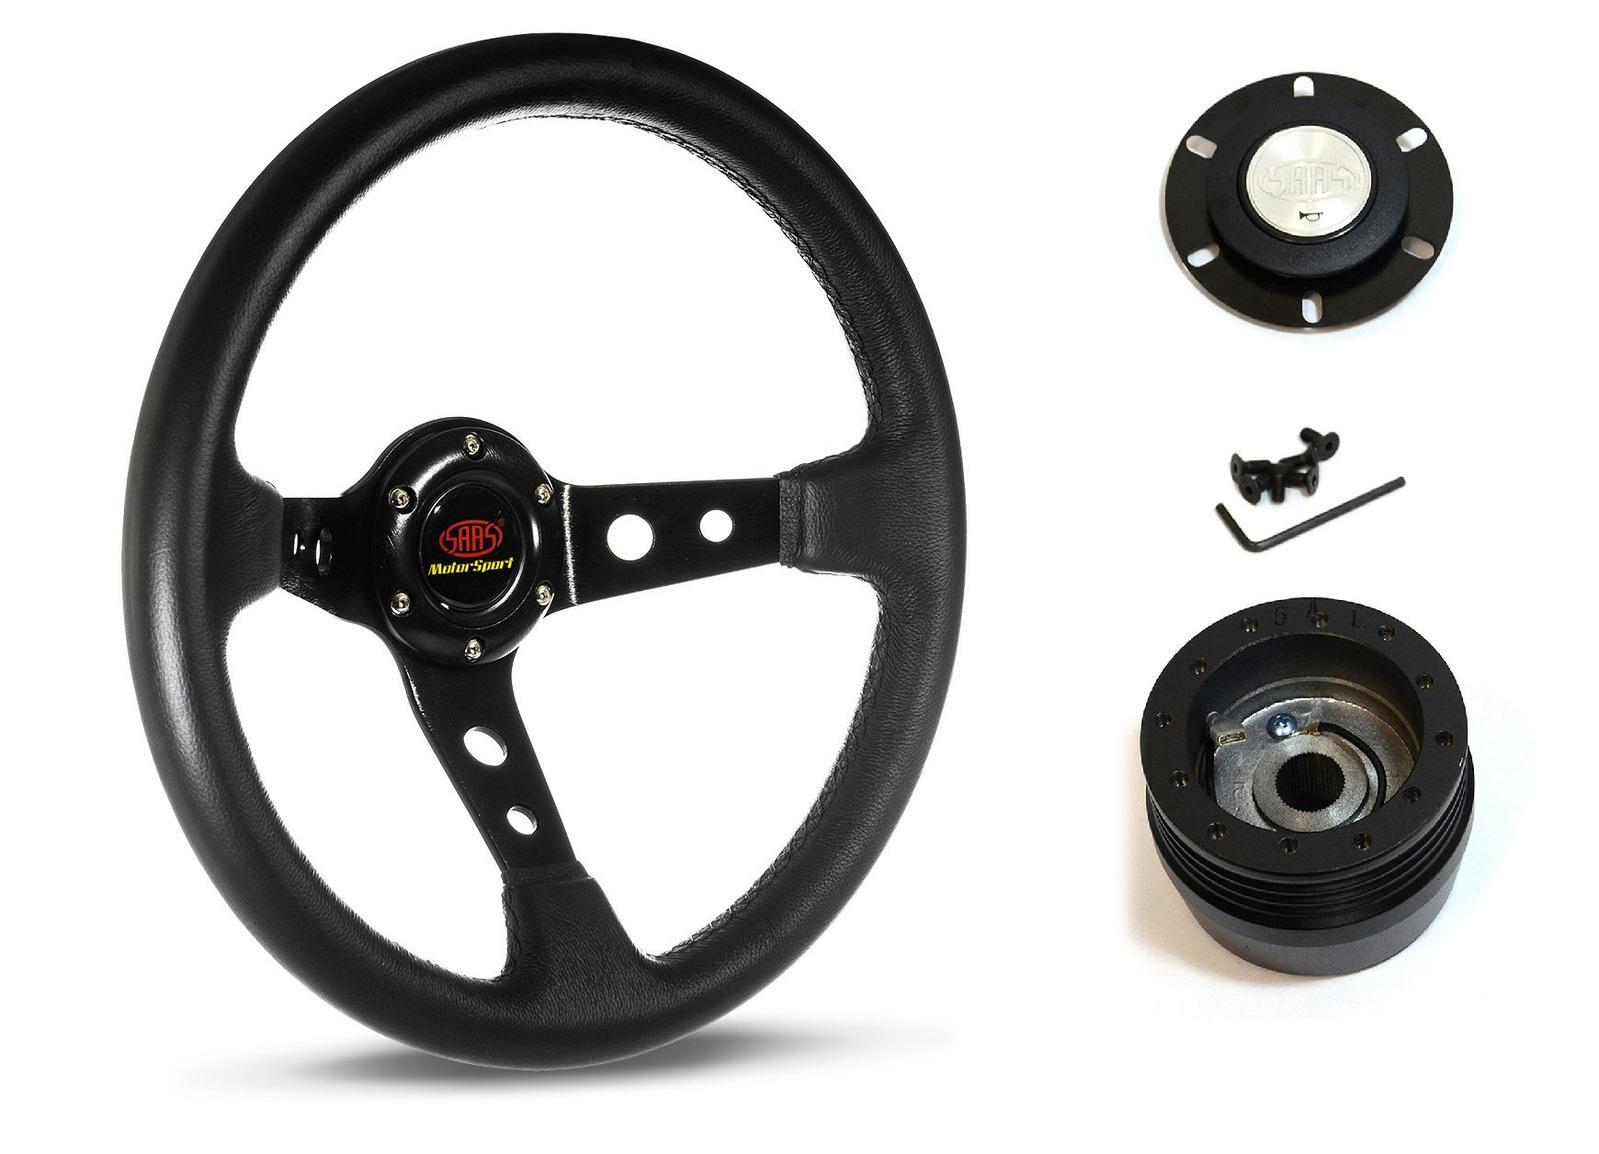 SAAS Steering Wheel Leather 14" ADR GT Deep Dish Black With Holes SWGT3 and SAAS boss kit for Ford Corsair All Models 1988-1996